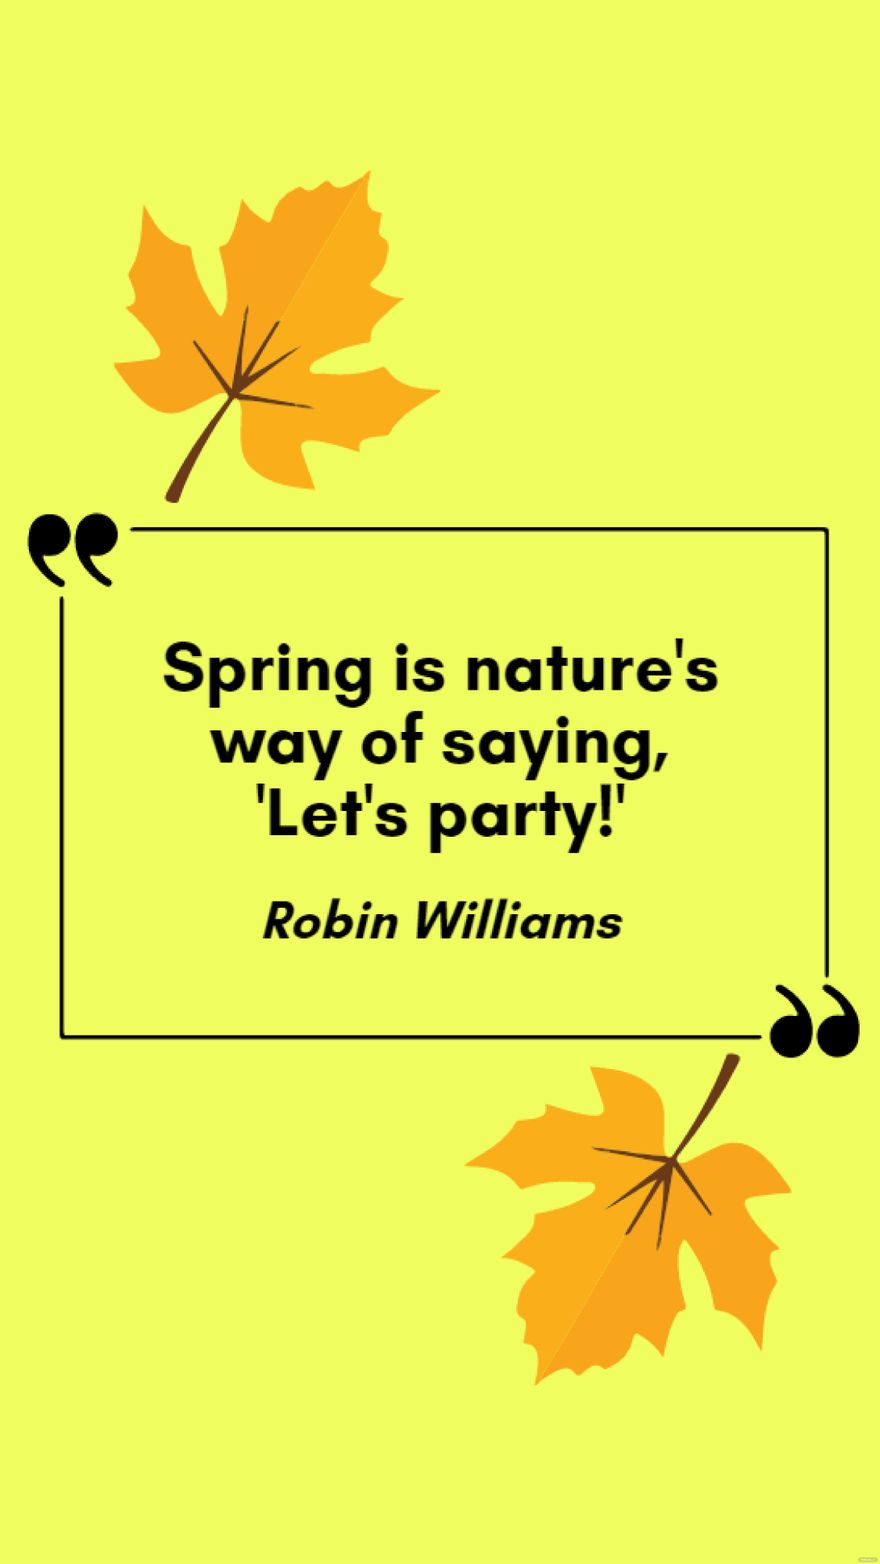 Robin Williams - Spring is nature's way of saying, 'Let's party!'